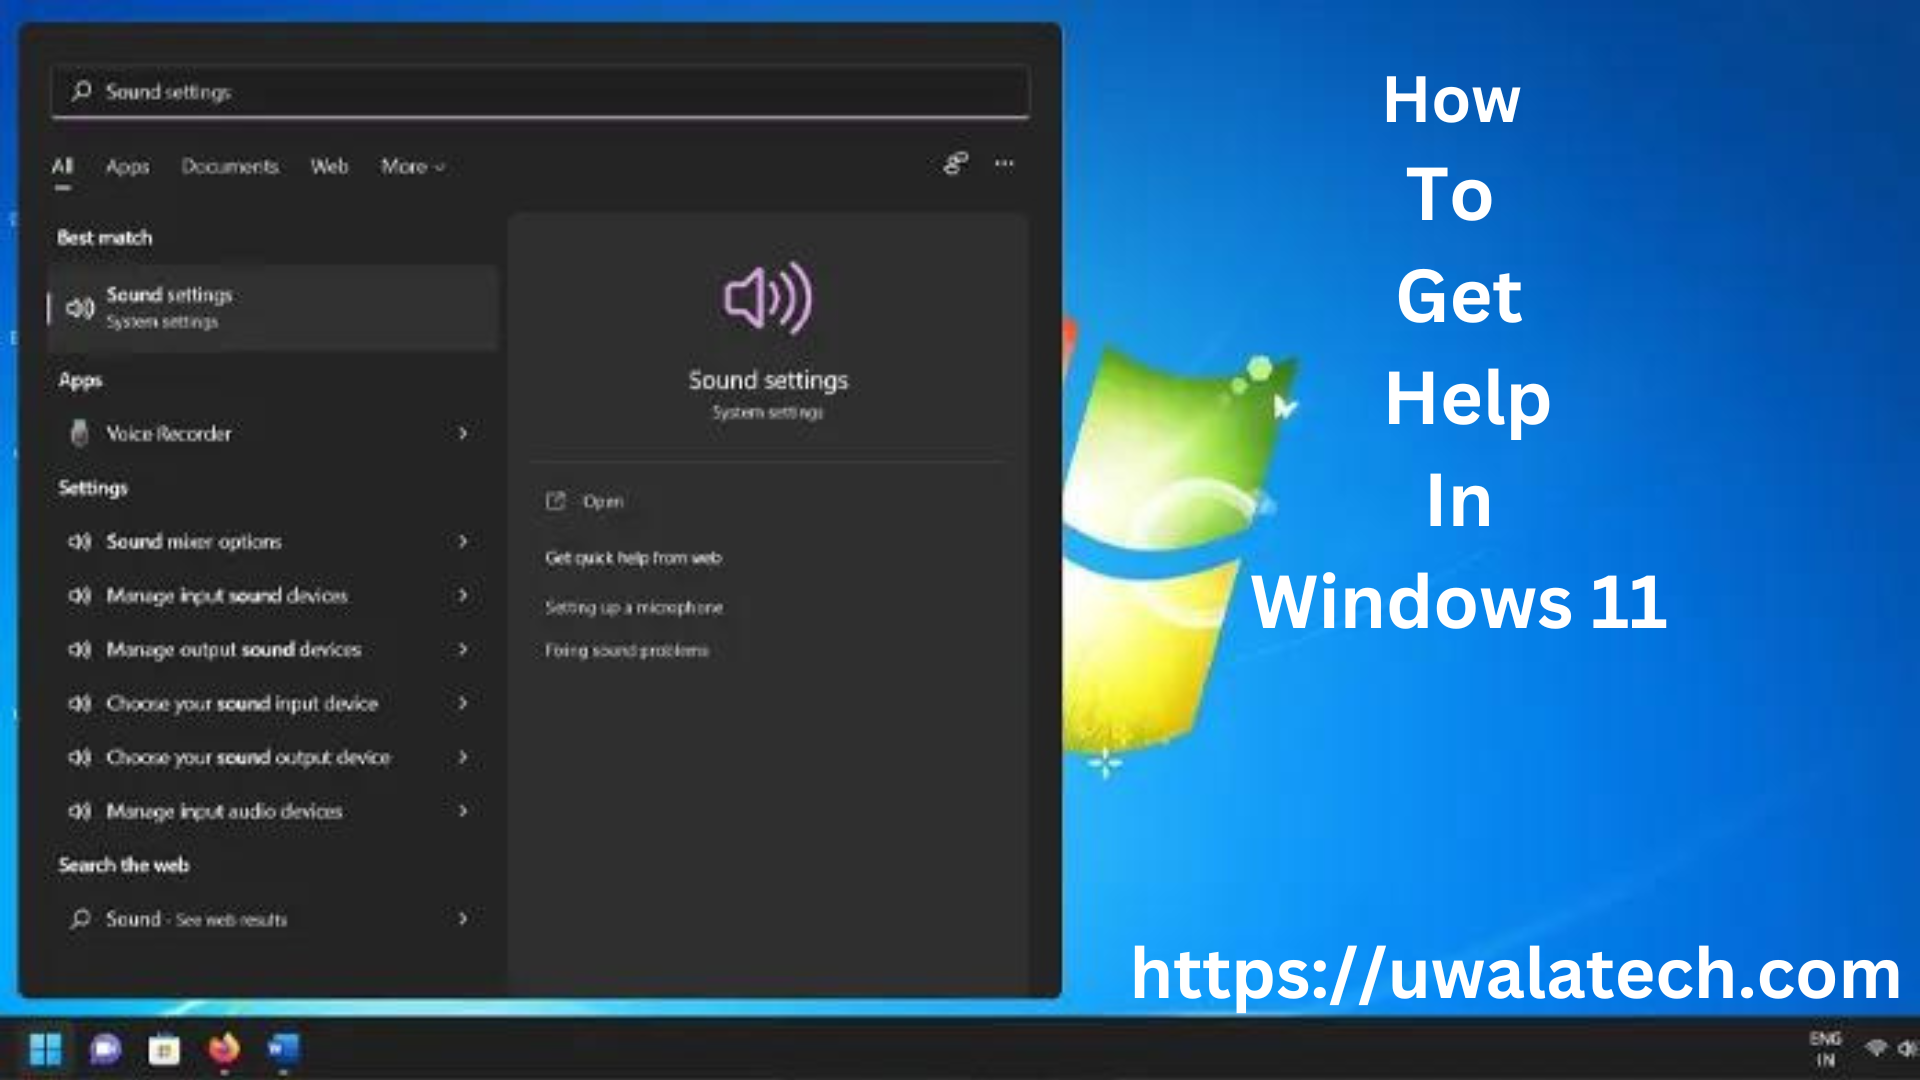 How To Get Help In Windows 11